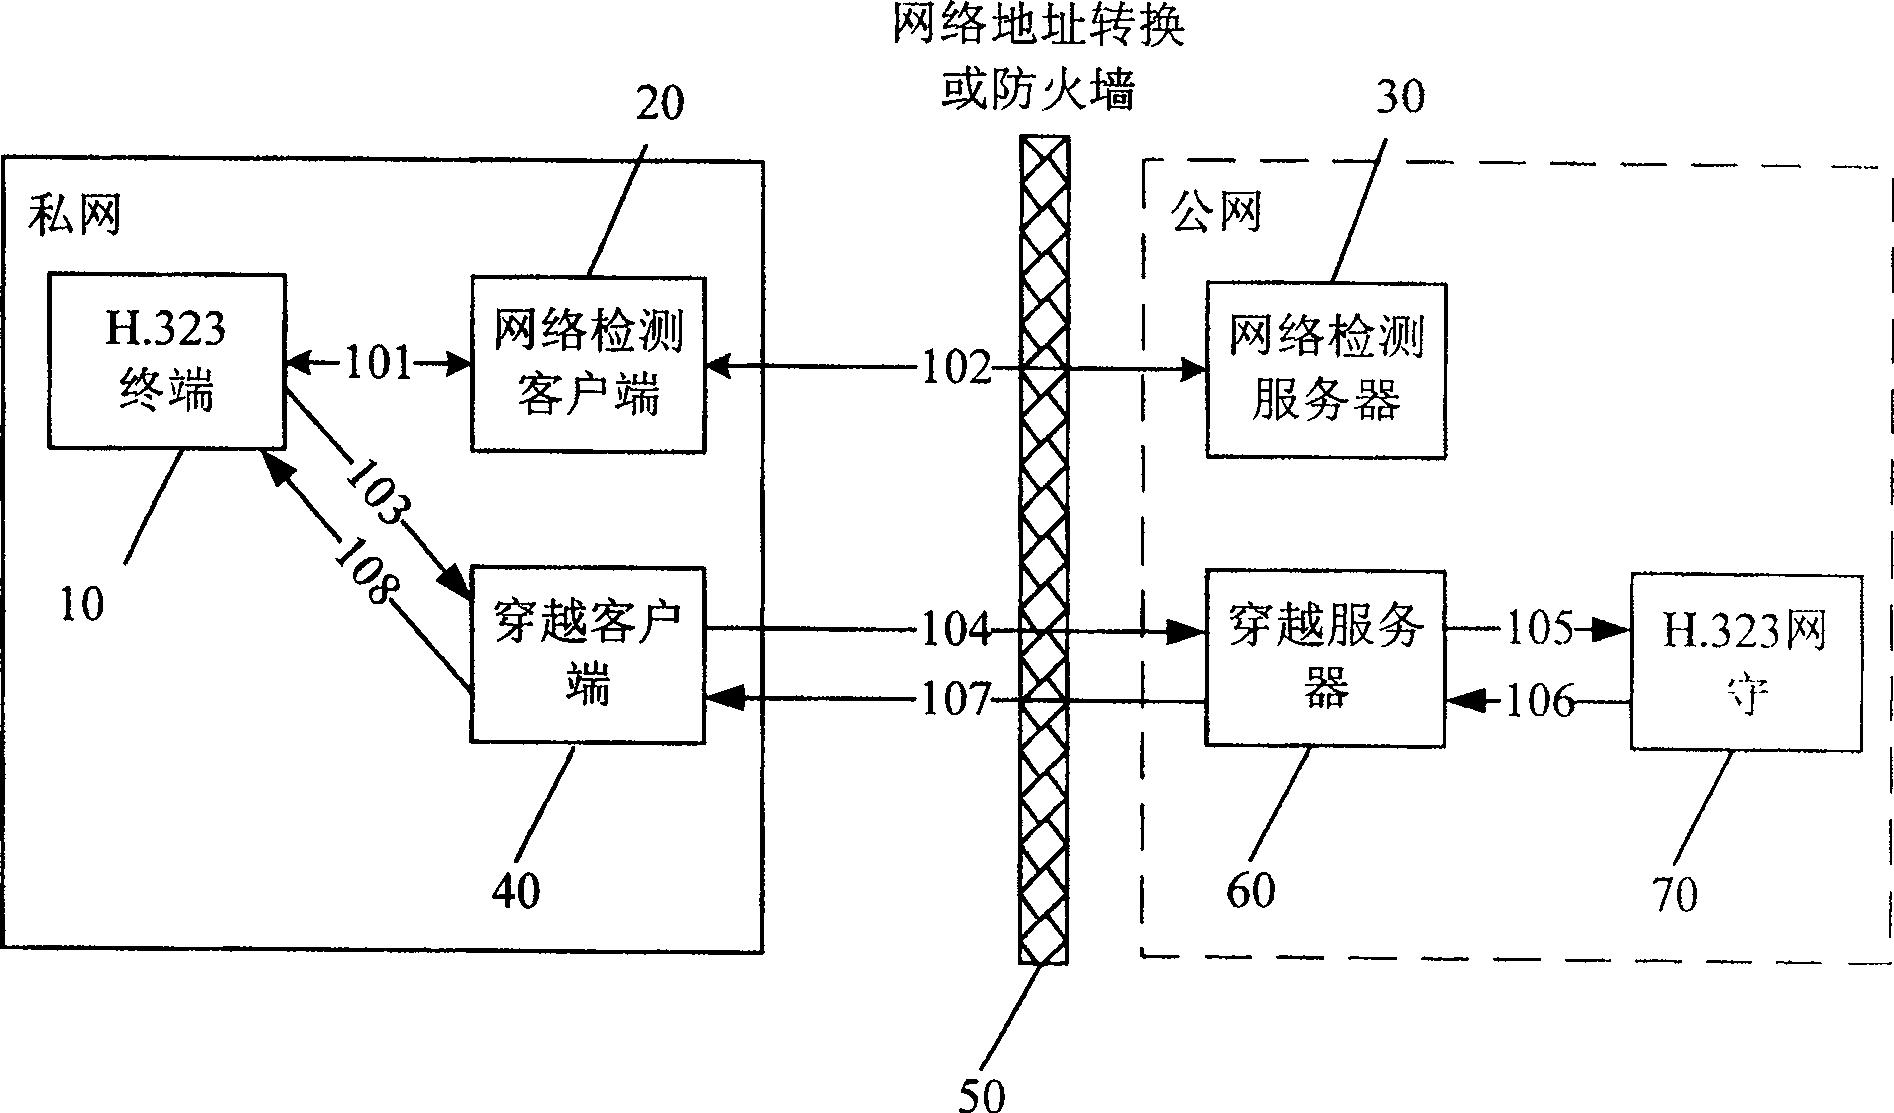 Processing system of IP multi-media communication service and the method for IP multi-media communication